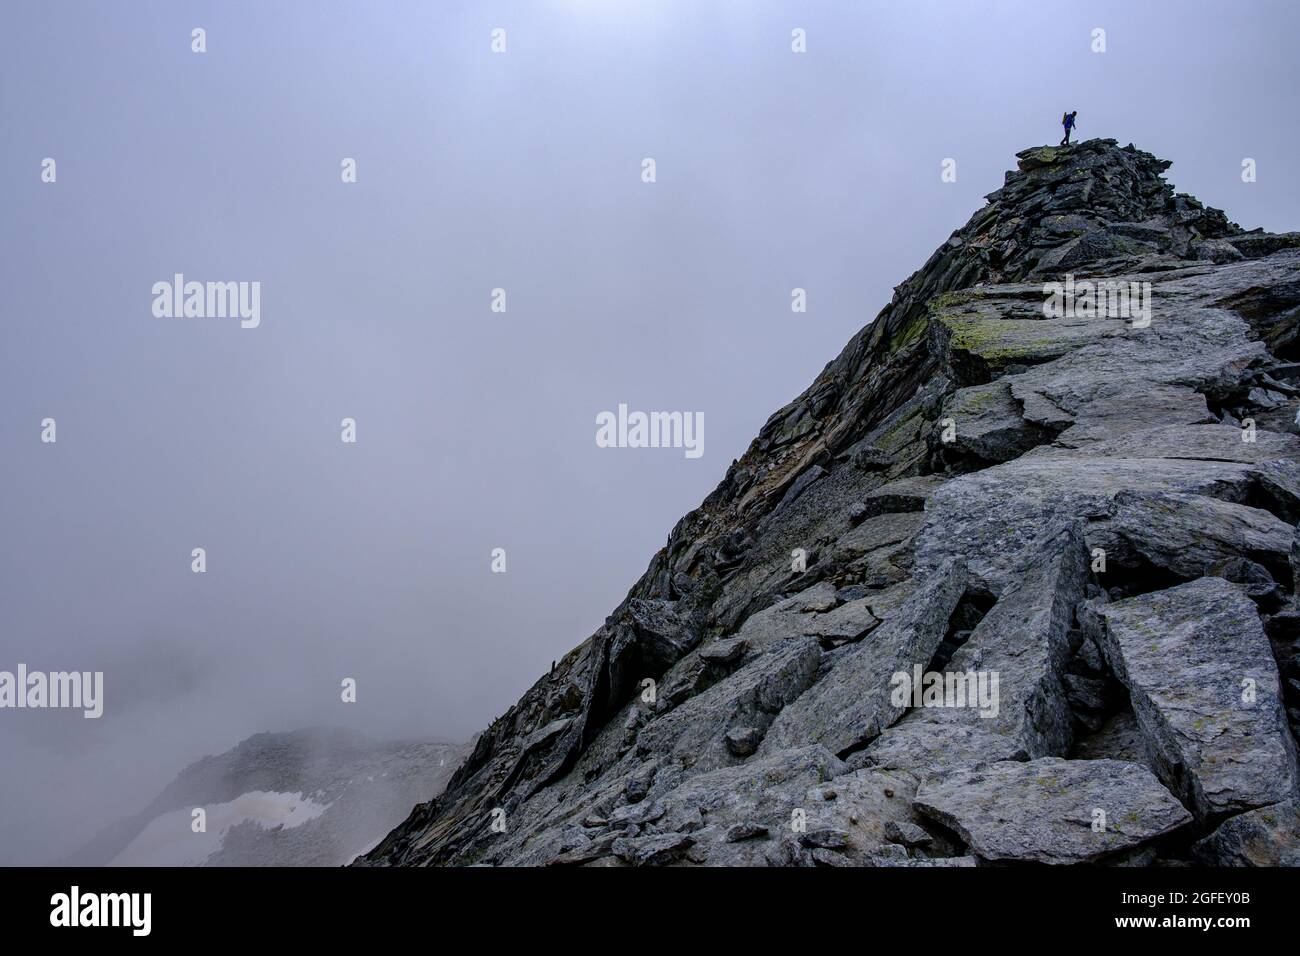 Climber on top of a rocky mountain surrounded by clouds Stock Photo